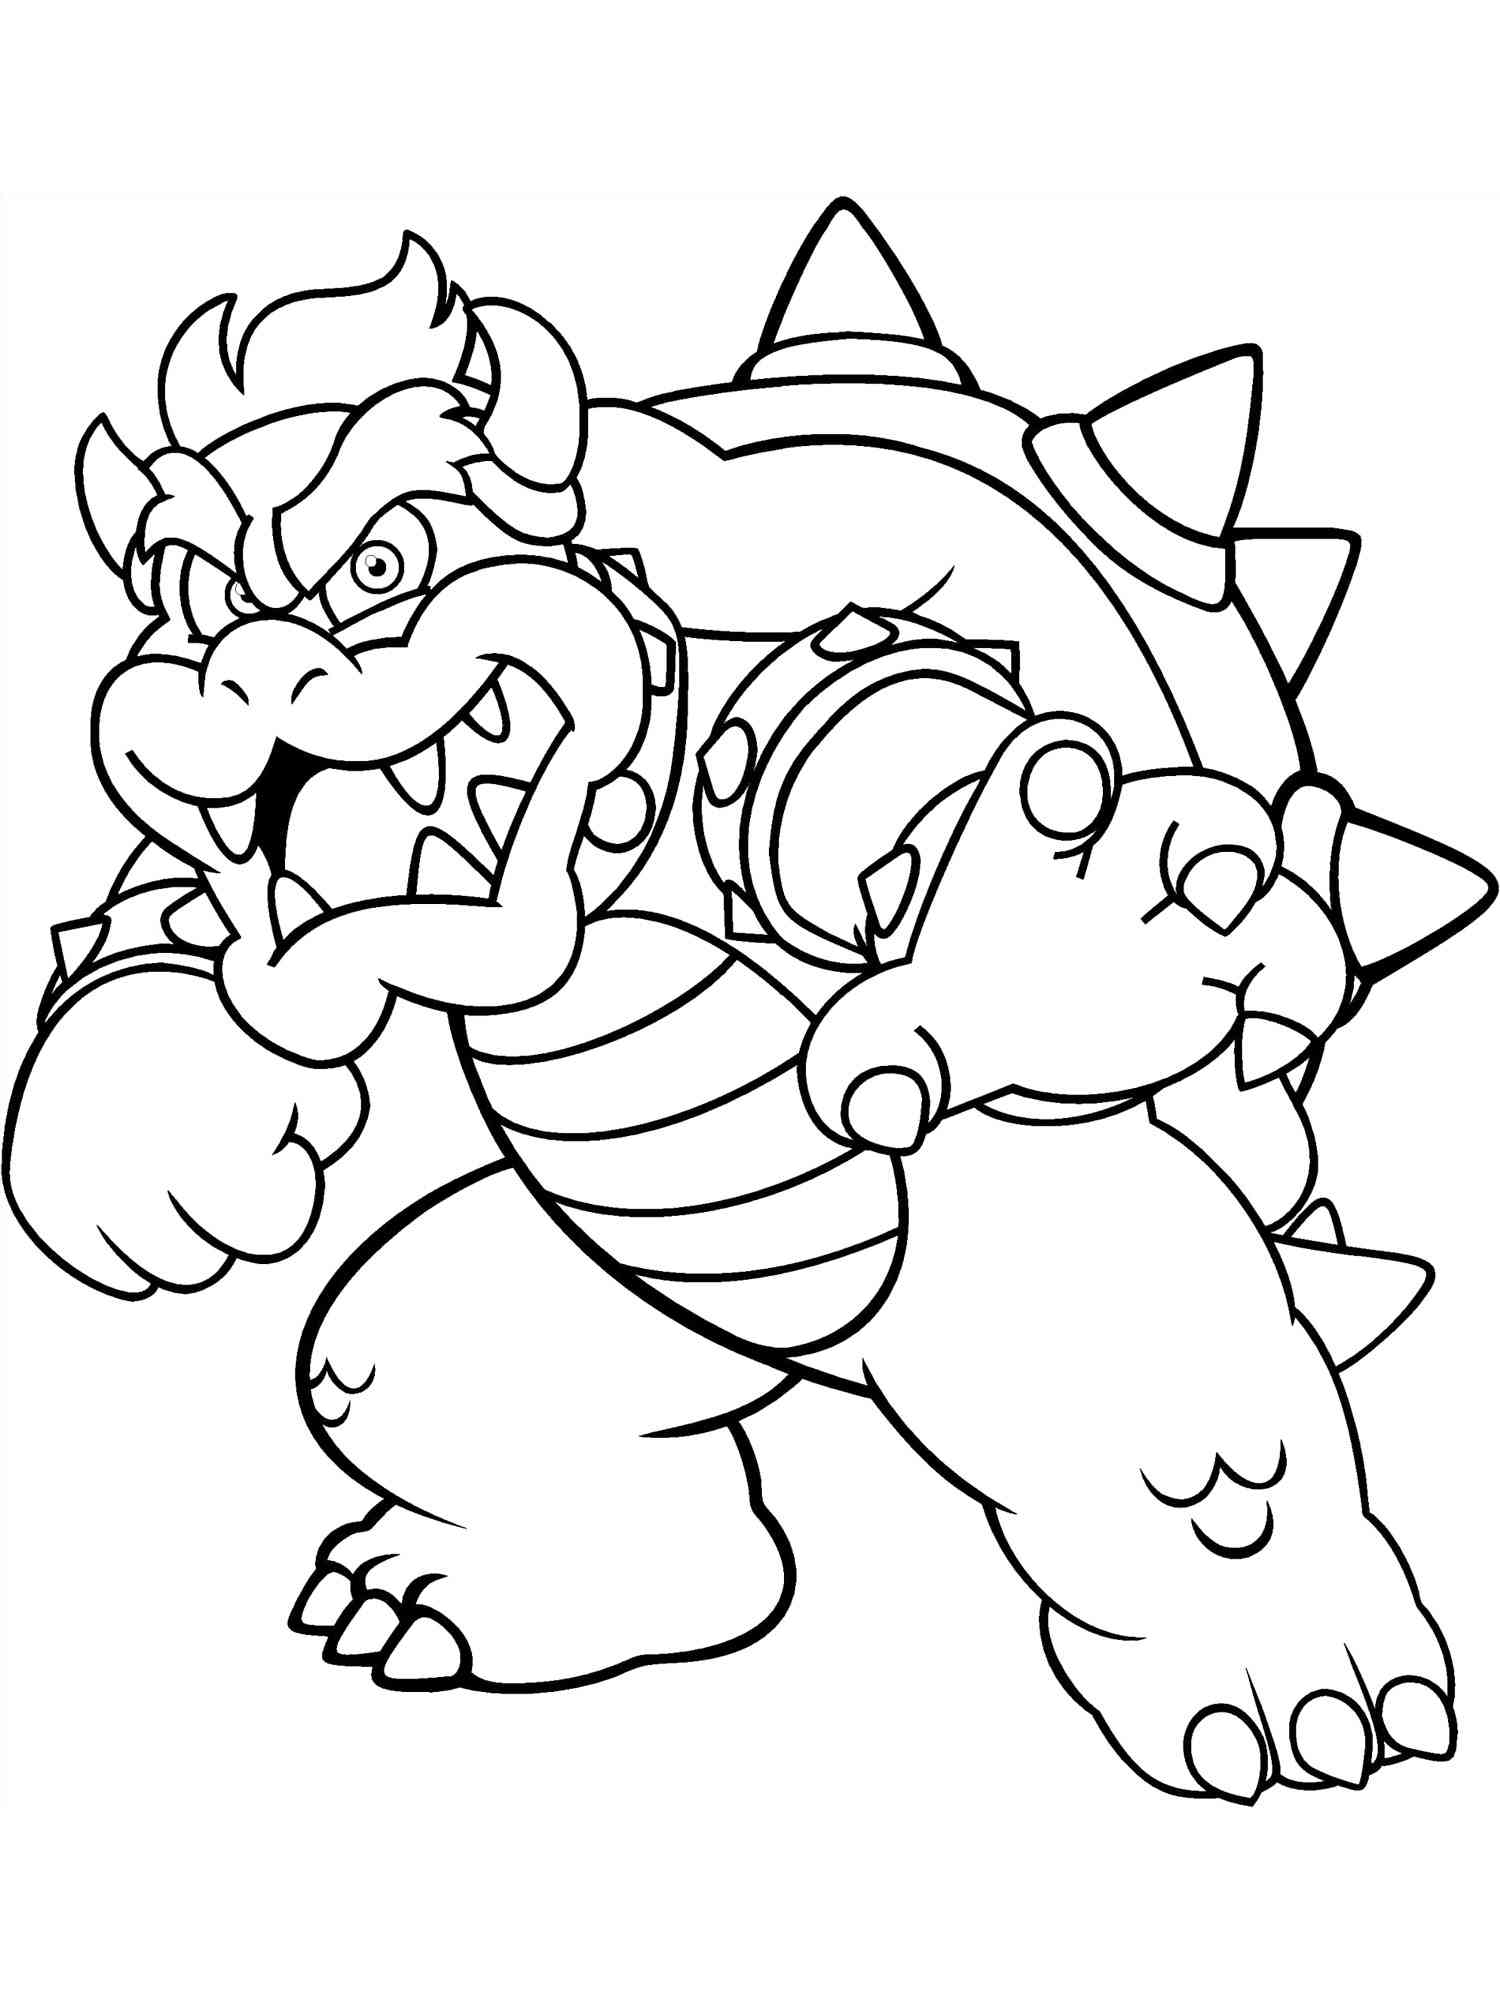 Fierce Bowser coloring page